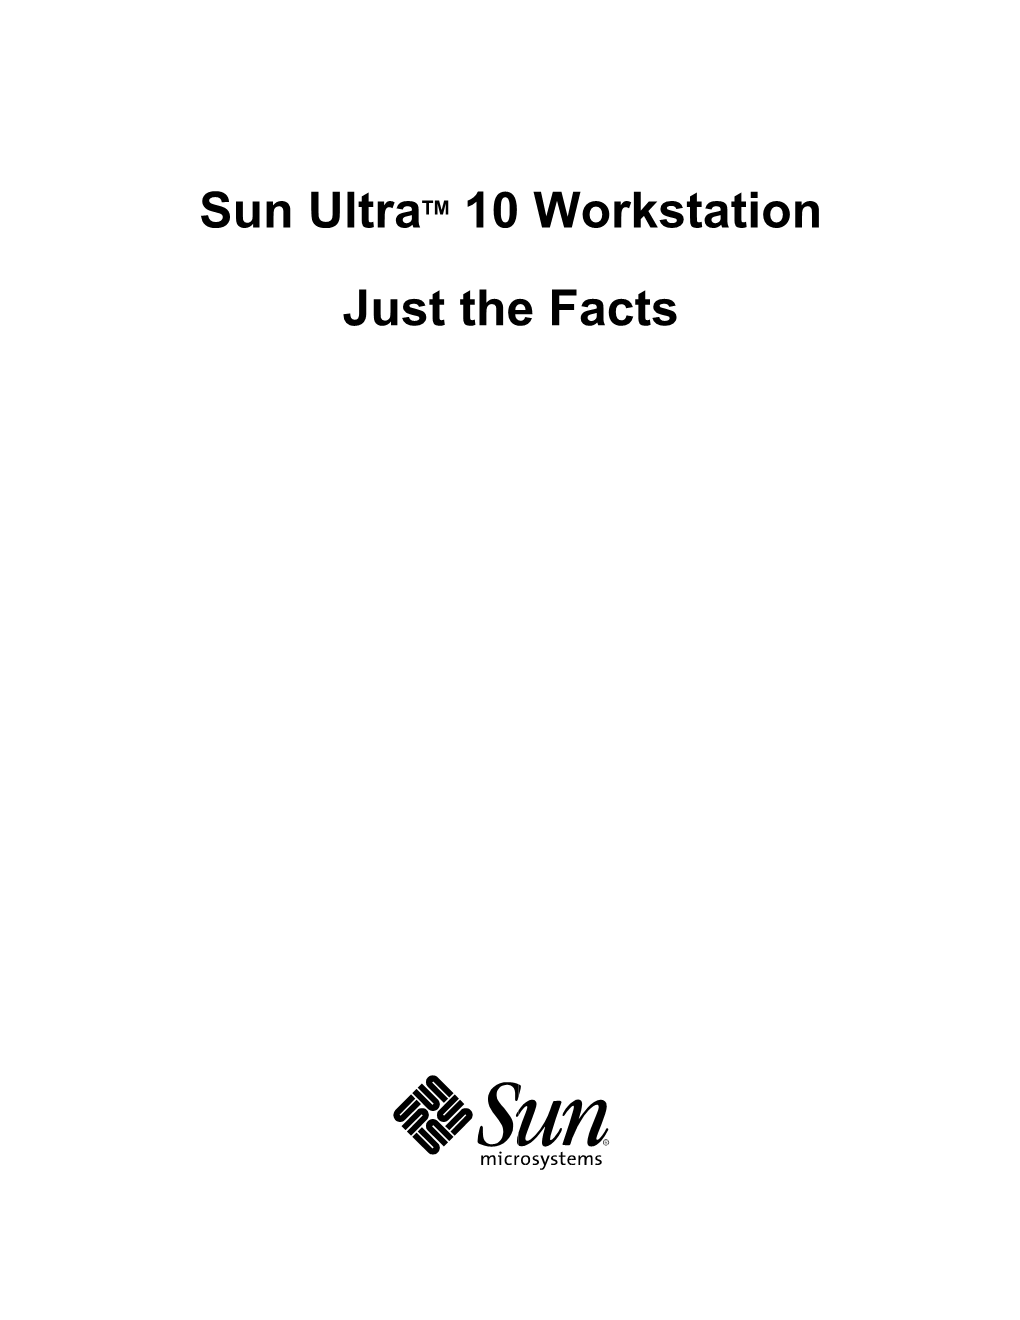 Ultra 10 Workstation Configurations